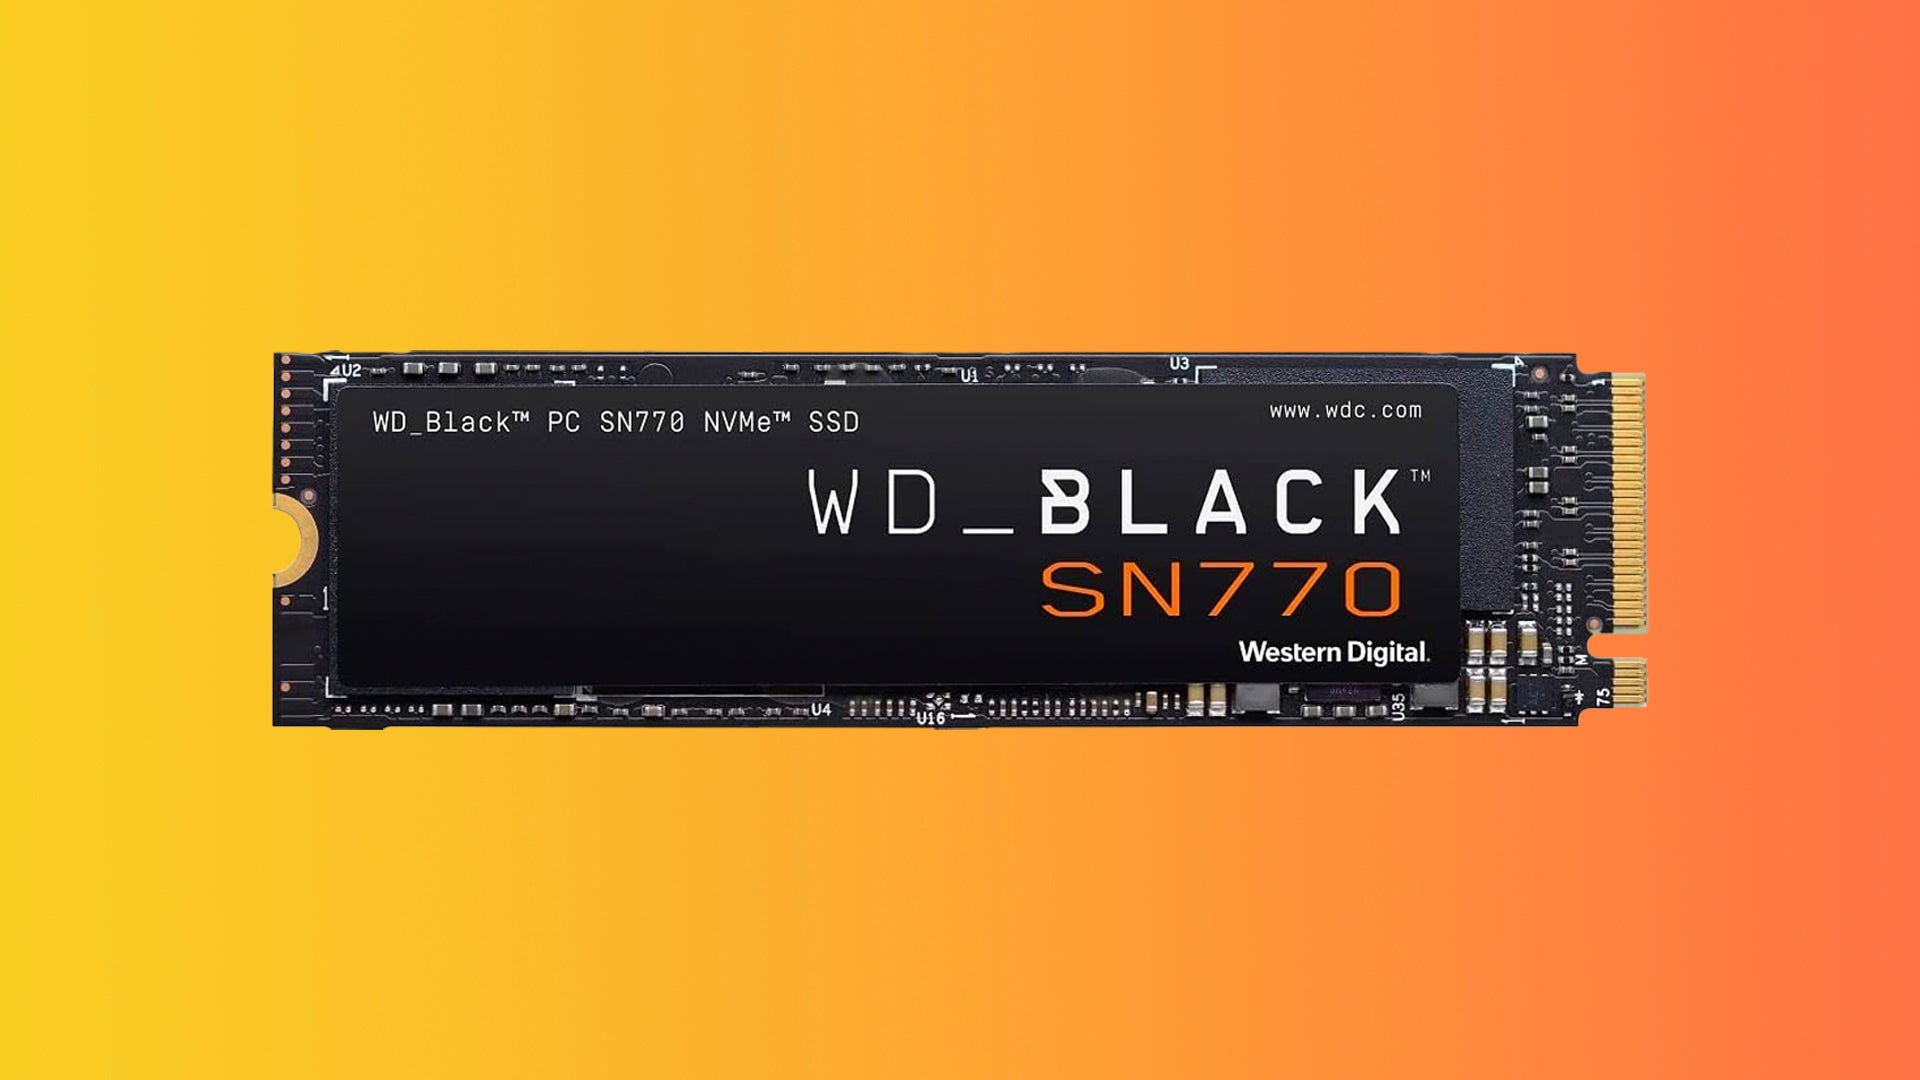 Grab the solid WD Black SN770 1TB SSD for just £72 at Ebay with